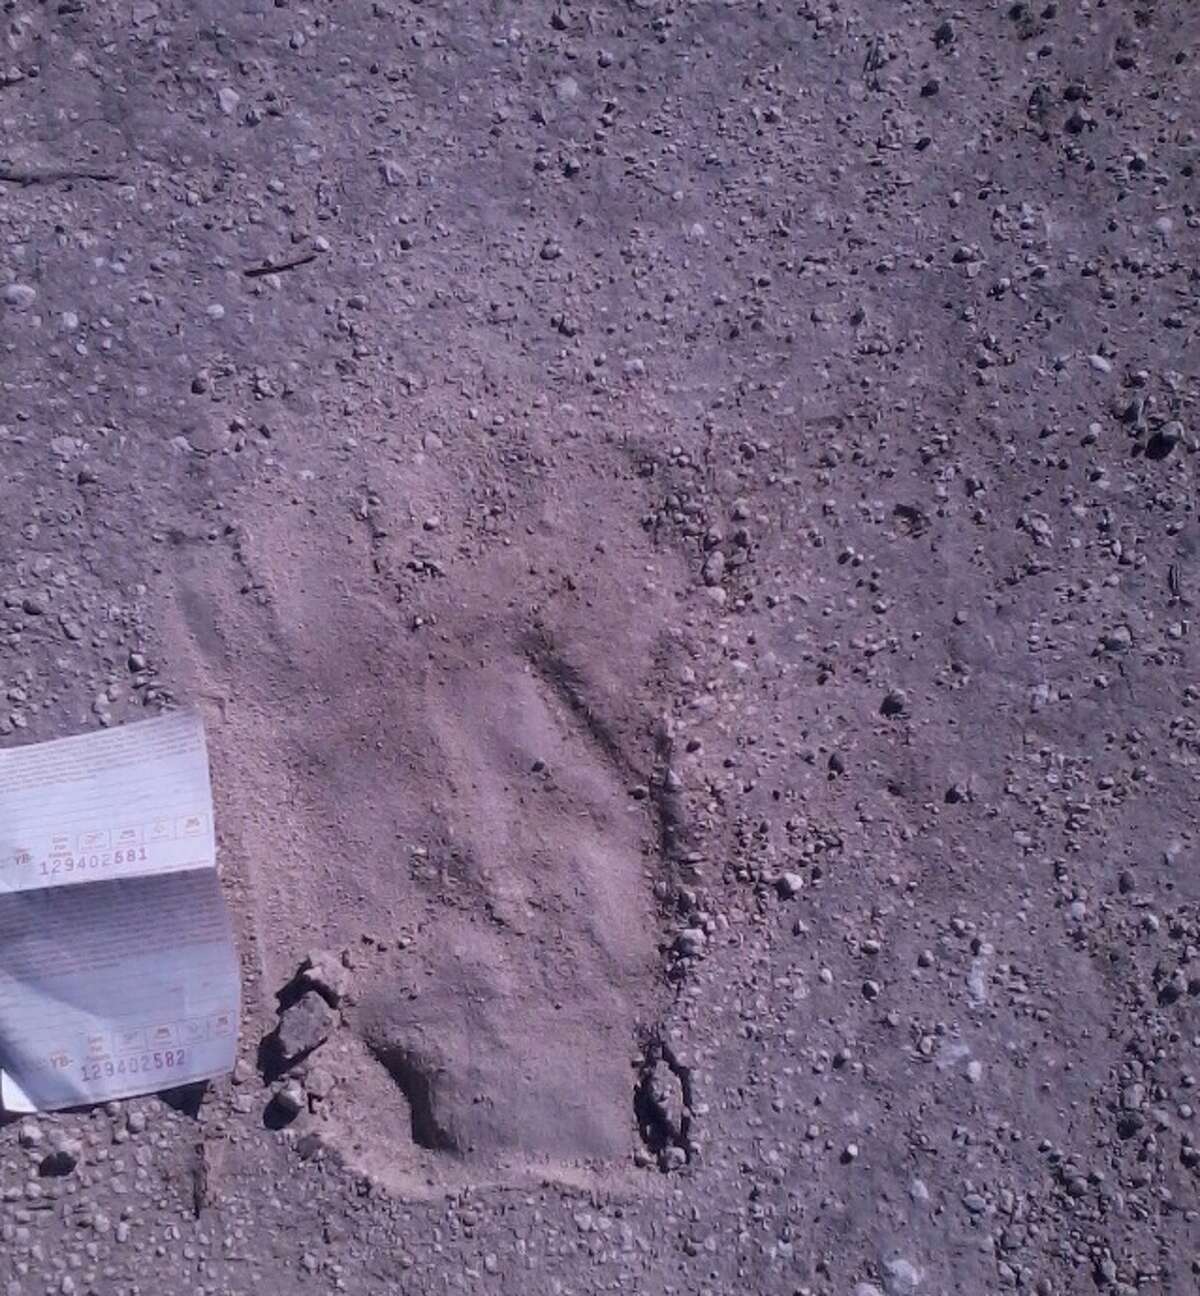 Bee County's Baldemar Galvan has interviewed local residents about Bigfoot sightings. He snapped a photo of what he believes is a footprint from the creature.